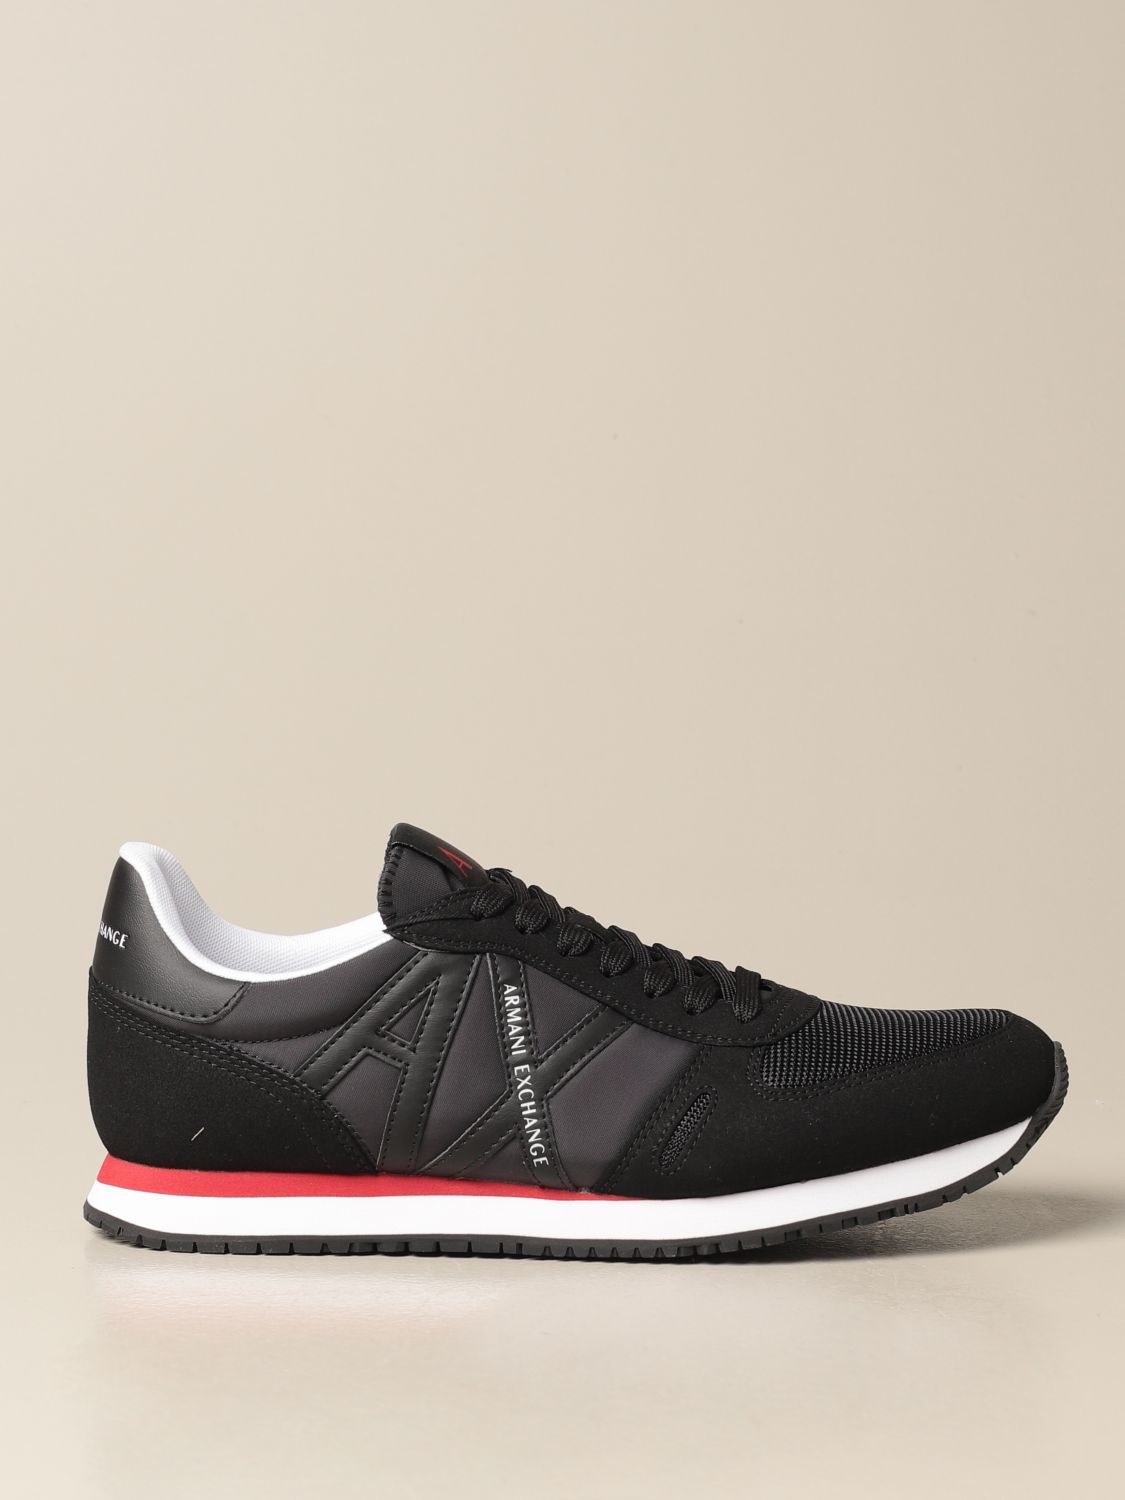 ARMANI EXCHANGE: Basic running sneakers with contrast logo | Sneakers ...